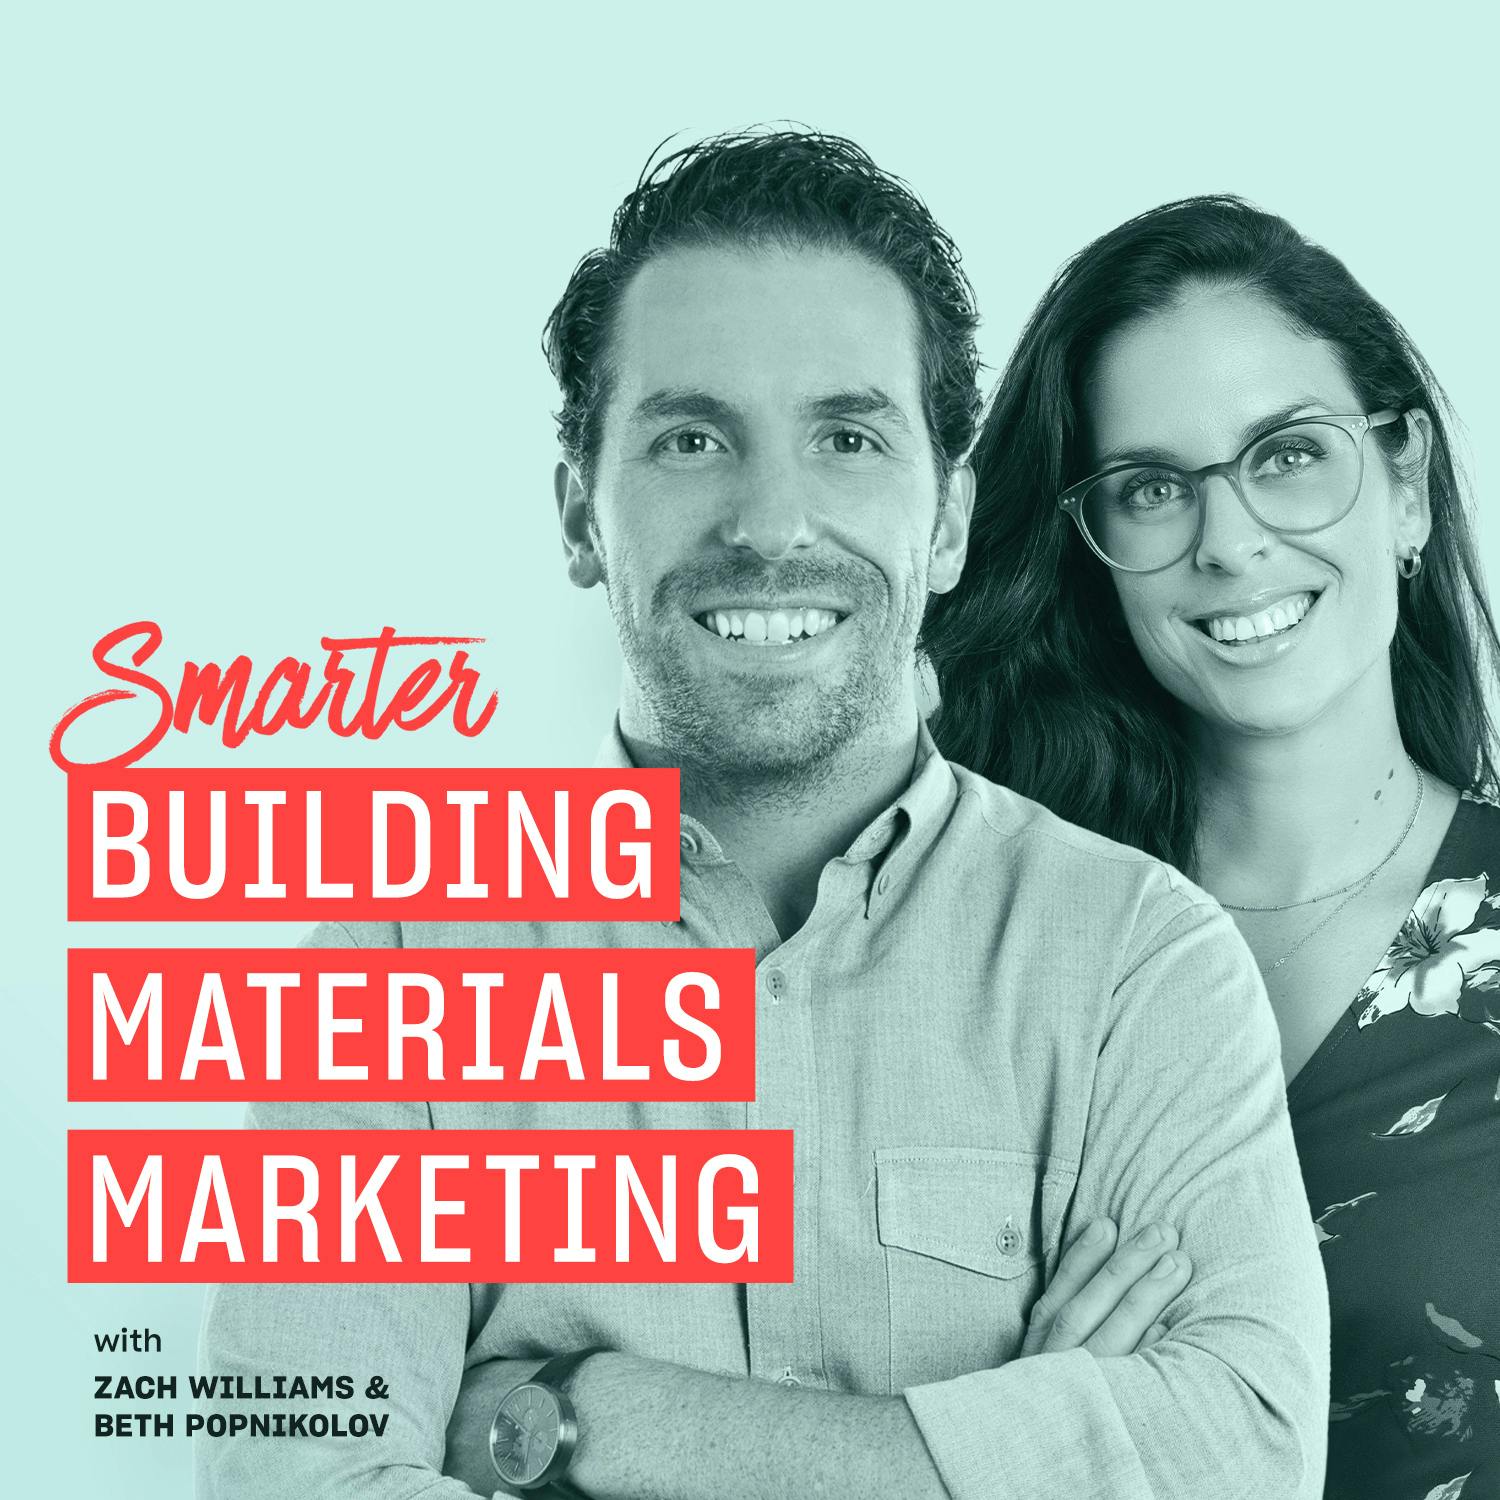 How Building Materials Companies Can Create Content That Educates & Retains Skilled Workers